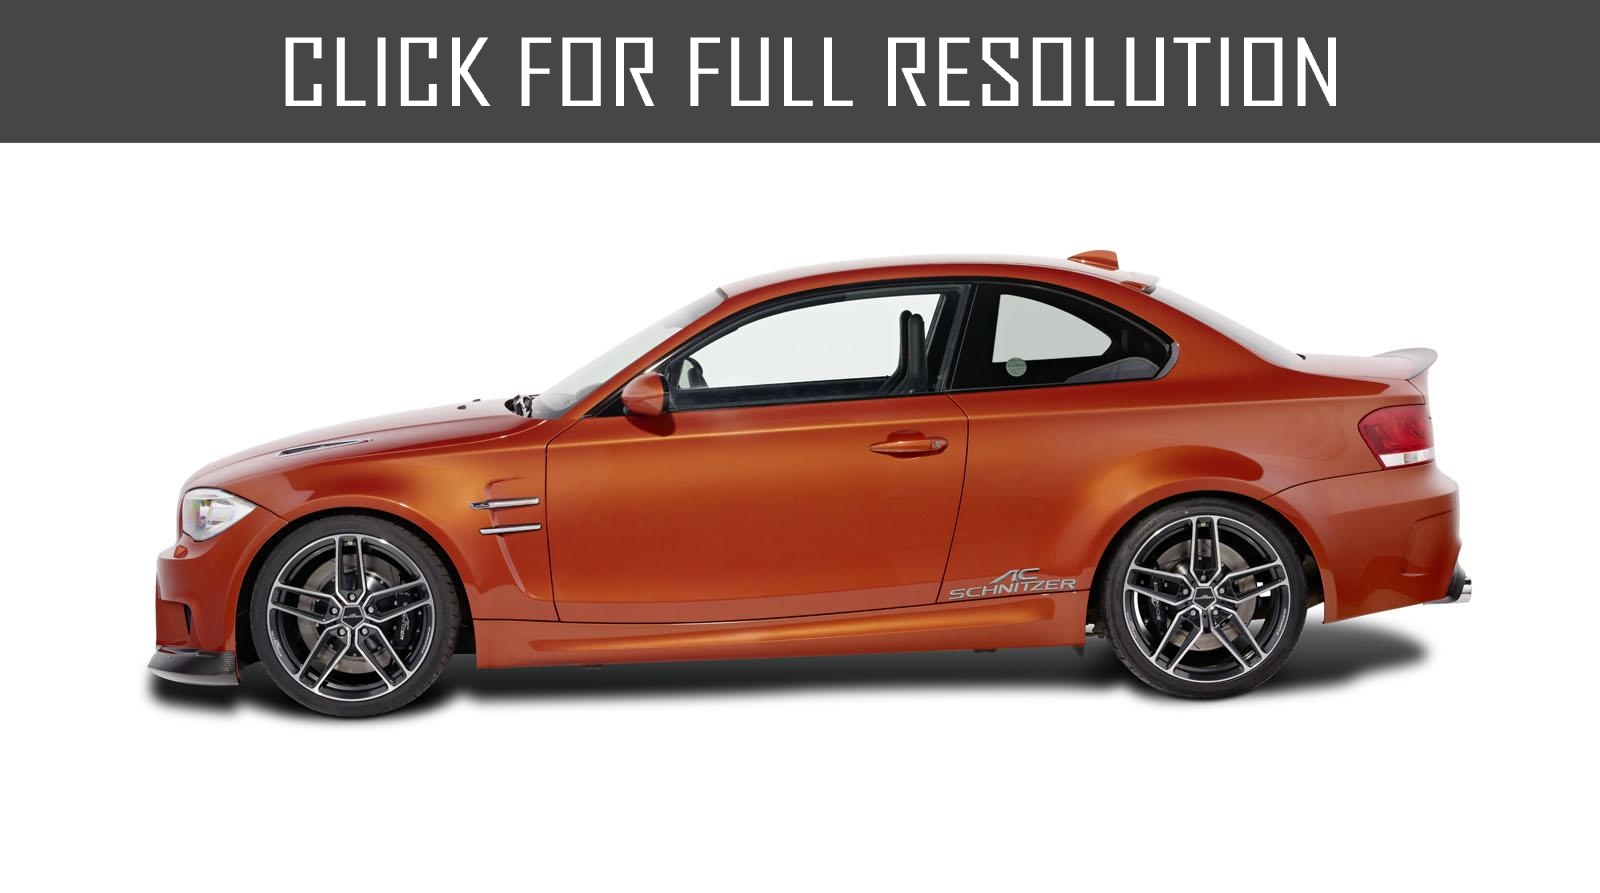 2012 Bmw 1 Series M Coupe